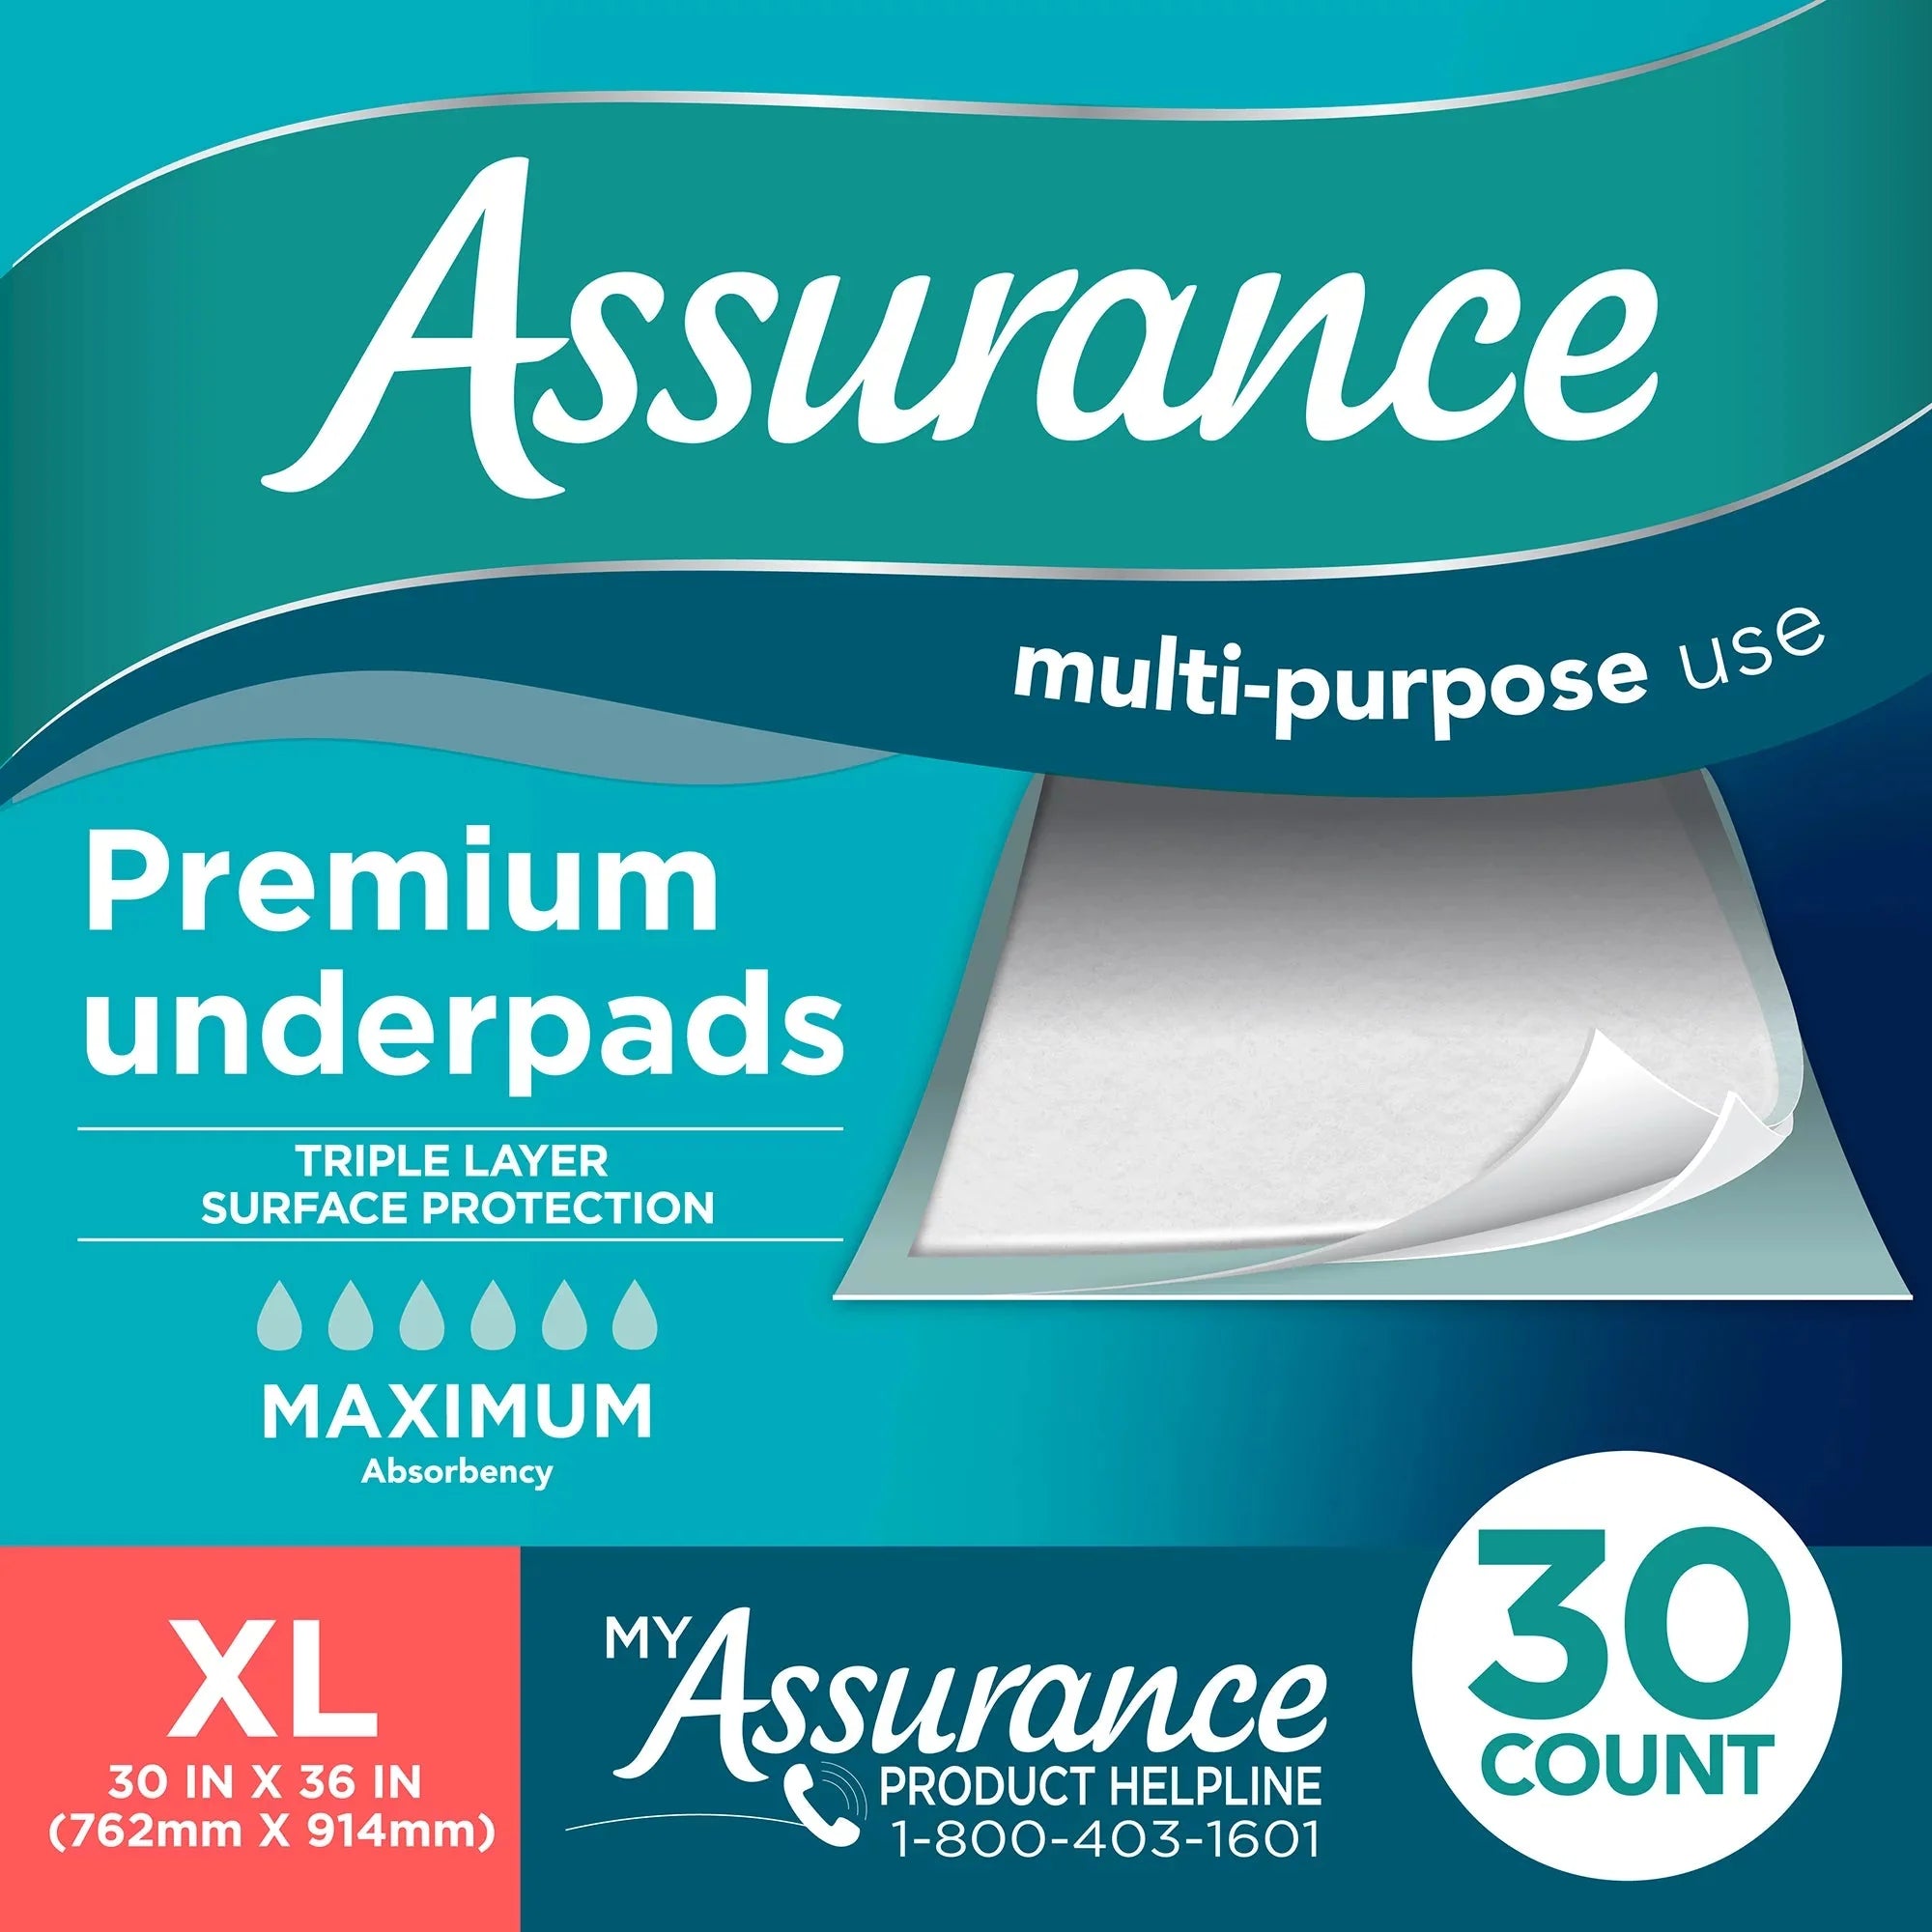 Wholesale prices with free shipping all over United States Assurance Unisex Premium Quilted Underpad, Maximum Absorbency, XL (30 Count) - Steven Deals